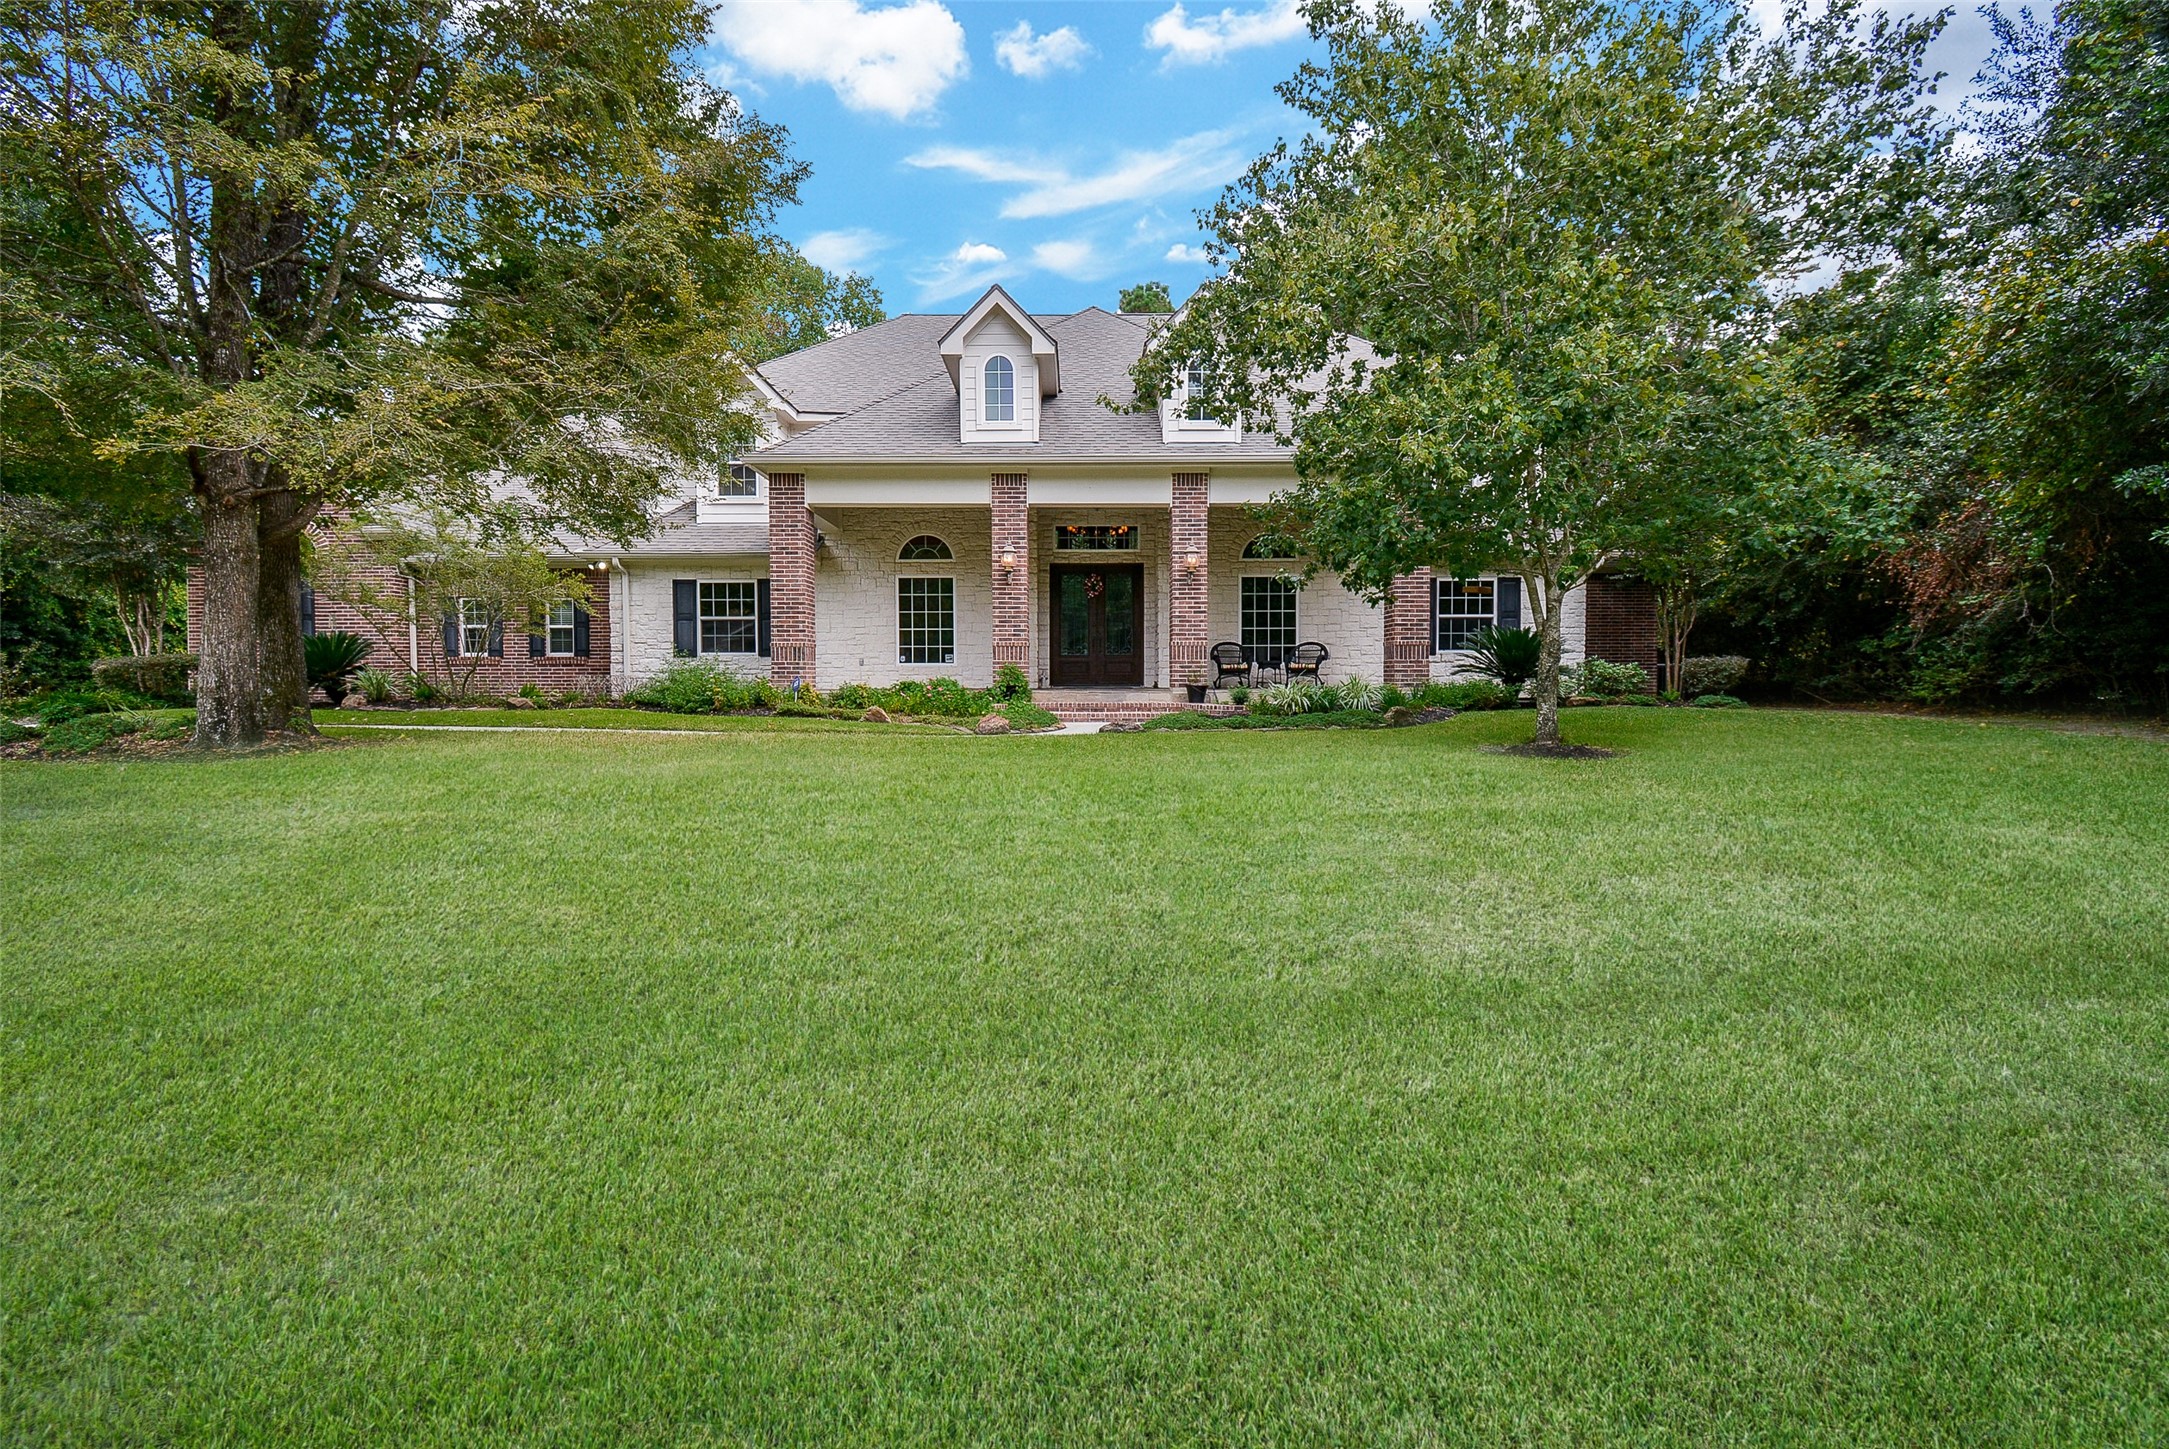 Elegance & Classic Beauty are throughout this Custom Designed & Built Spacious 2-Story Home in the Intimate & Highly Desired Gated Timberlake Village on over 3/4 Acre Wooded Lot. Approx. 16x14 Beautiful Covered Front Porch with Stained Bead-Board Ceiling.